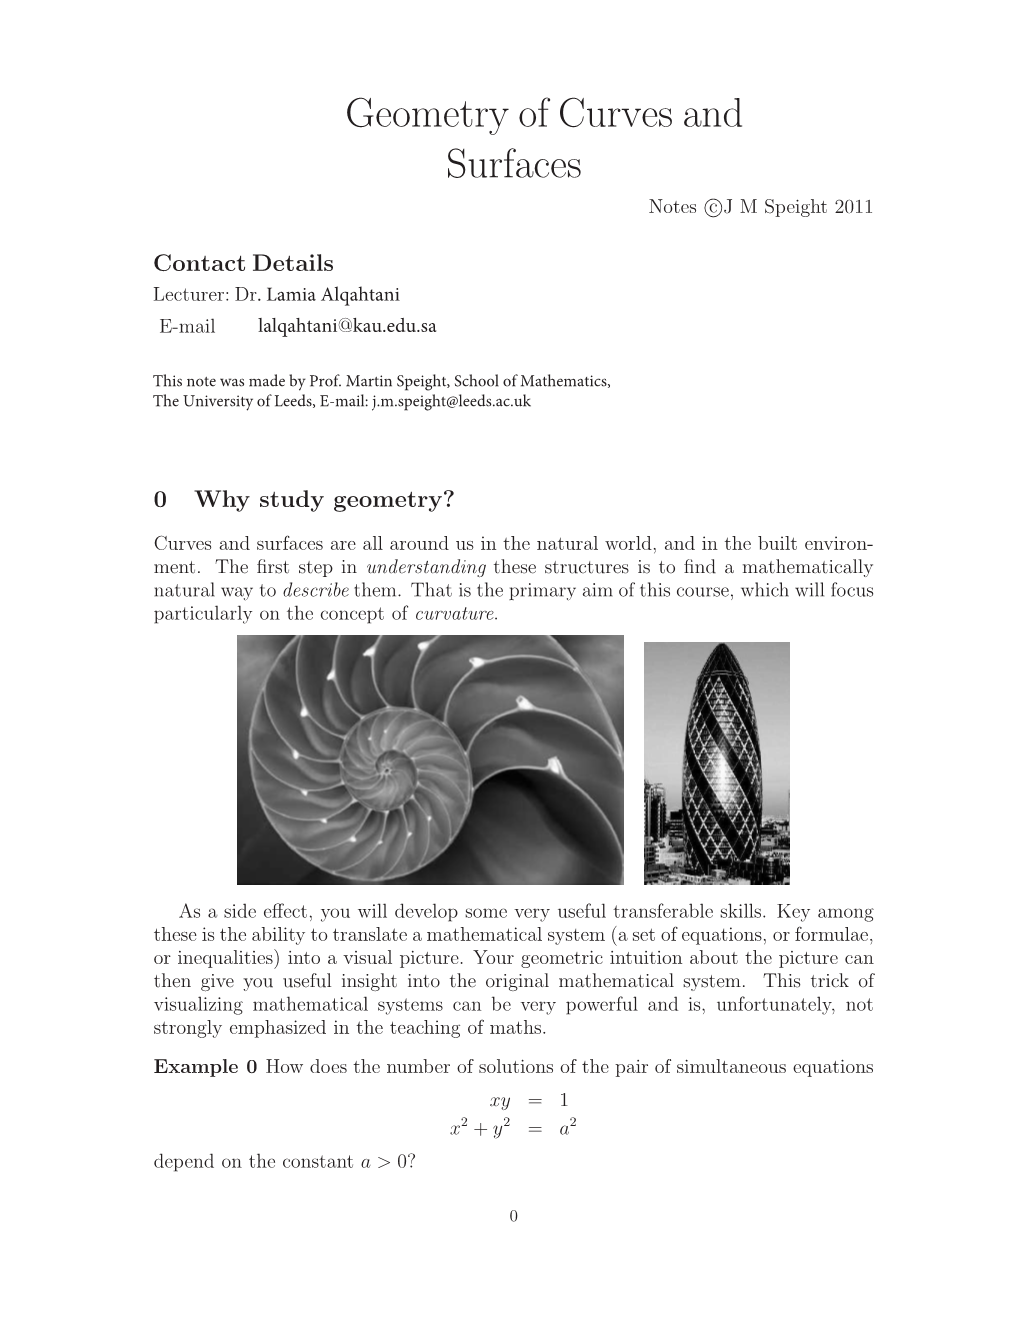 Geometry of Curves and Surfaces Notes C J M Speight 2011